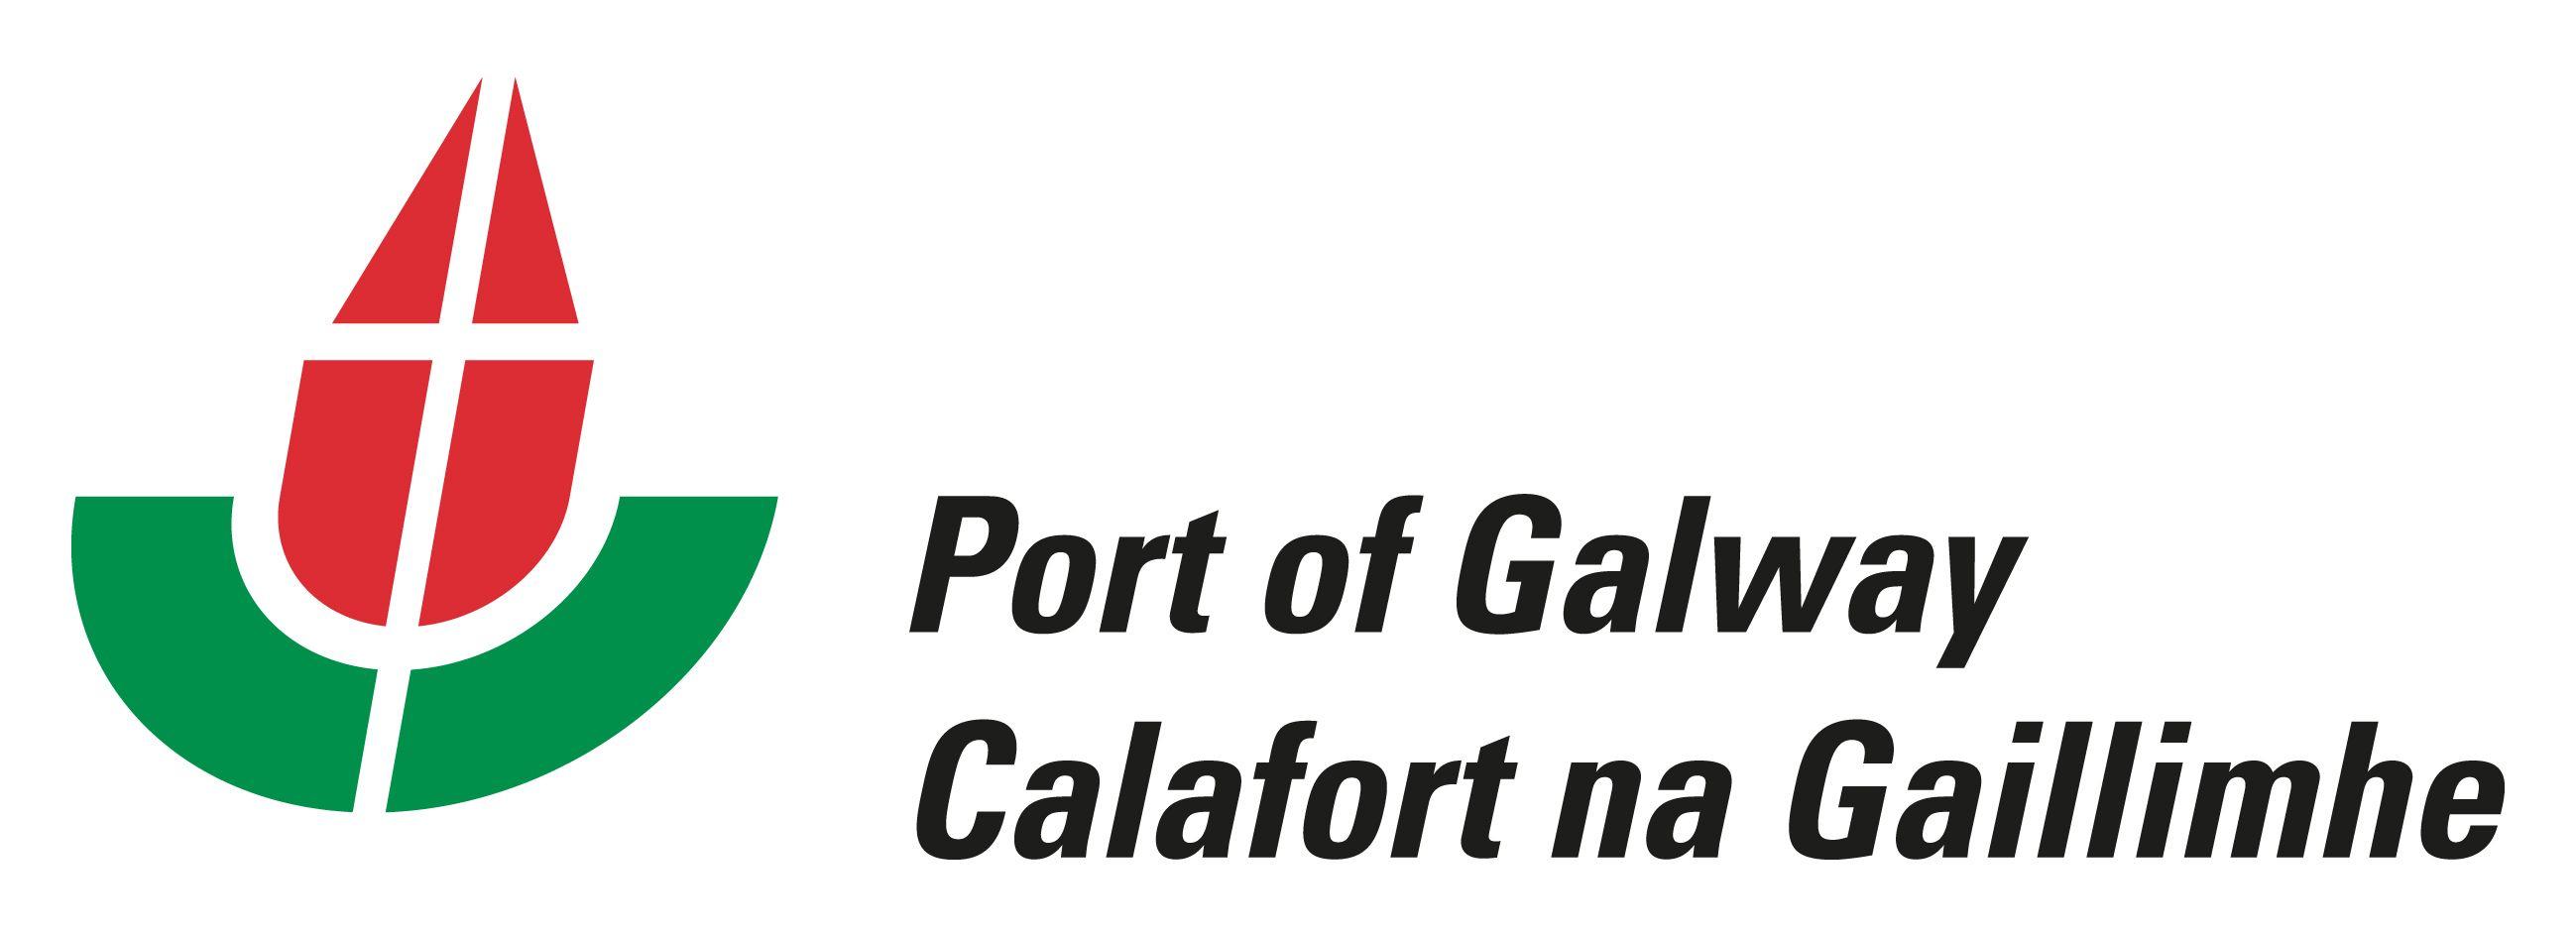 Galway Logo - Port of Galway - Galway Chamber